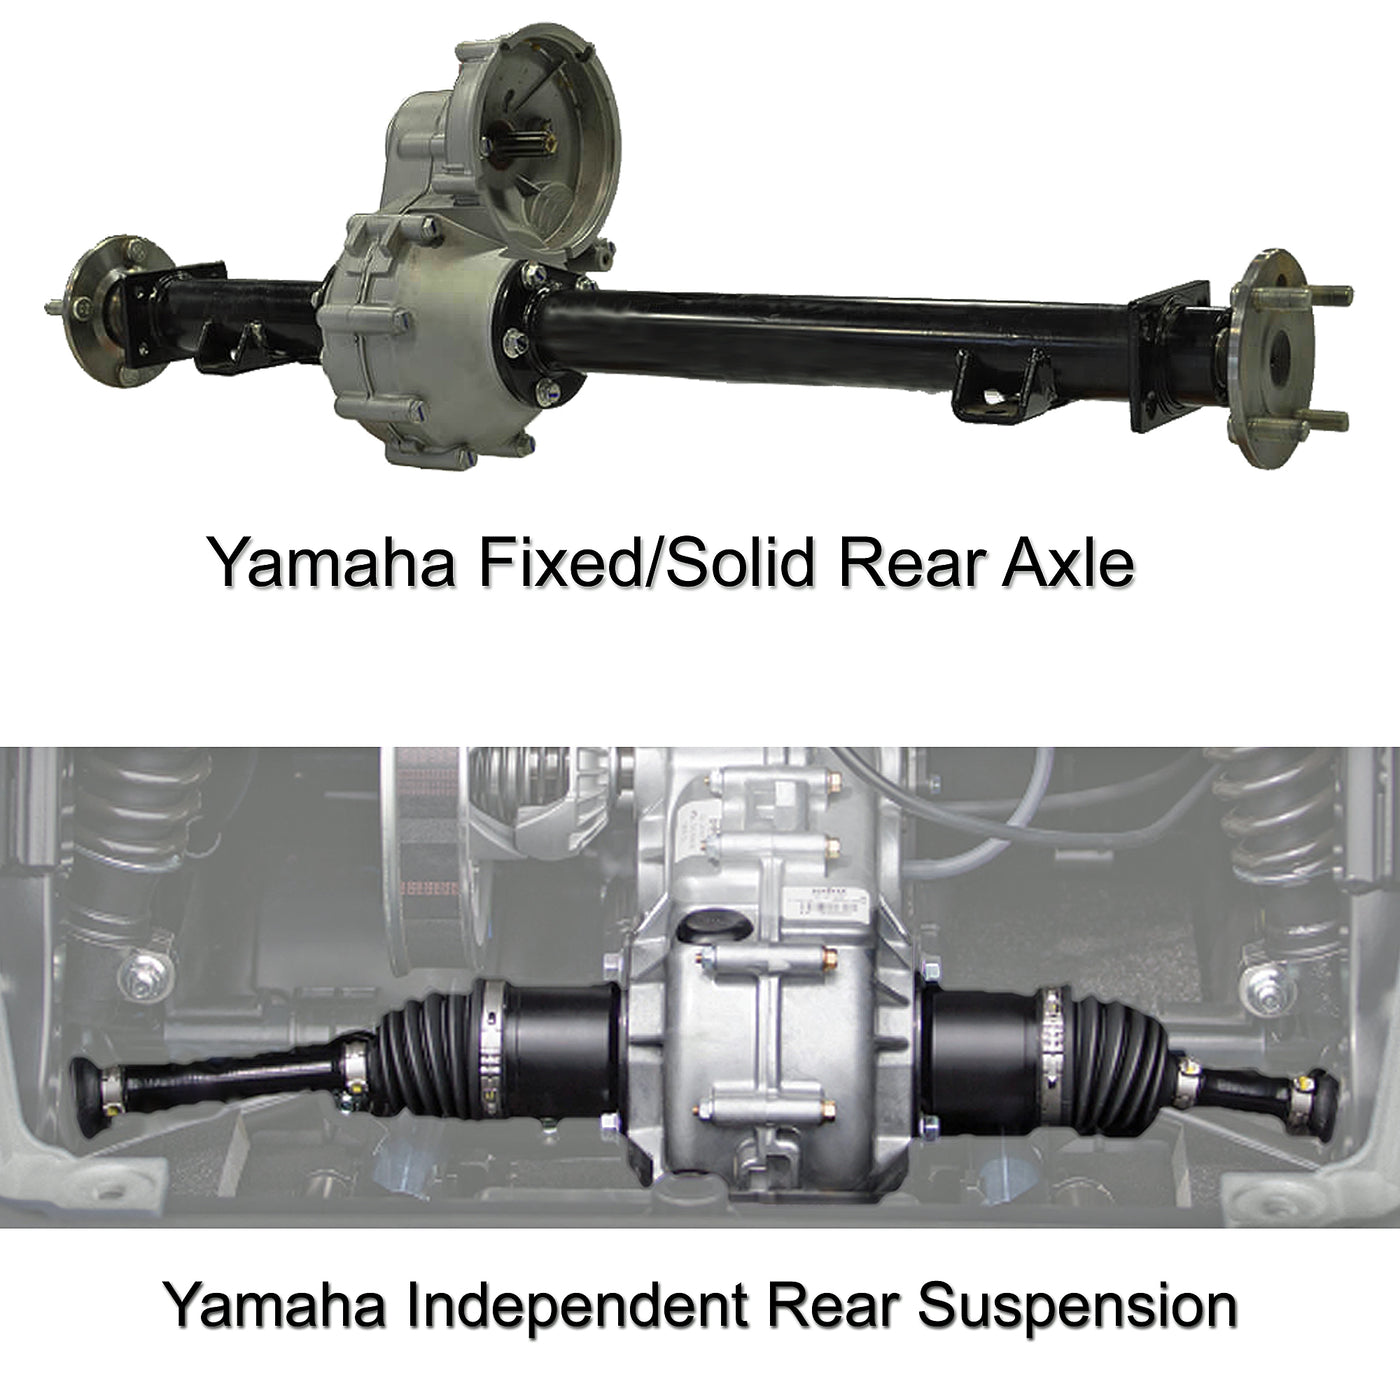 4" Madjax King XD Lift Kit for Yamaha G29/Drive/Drive2 with Independent rear suspension